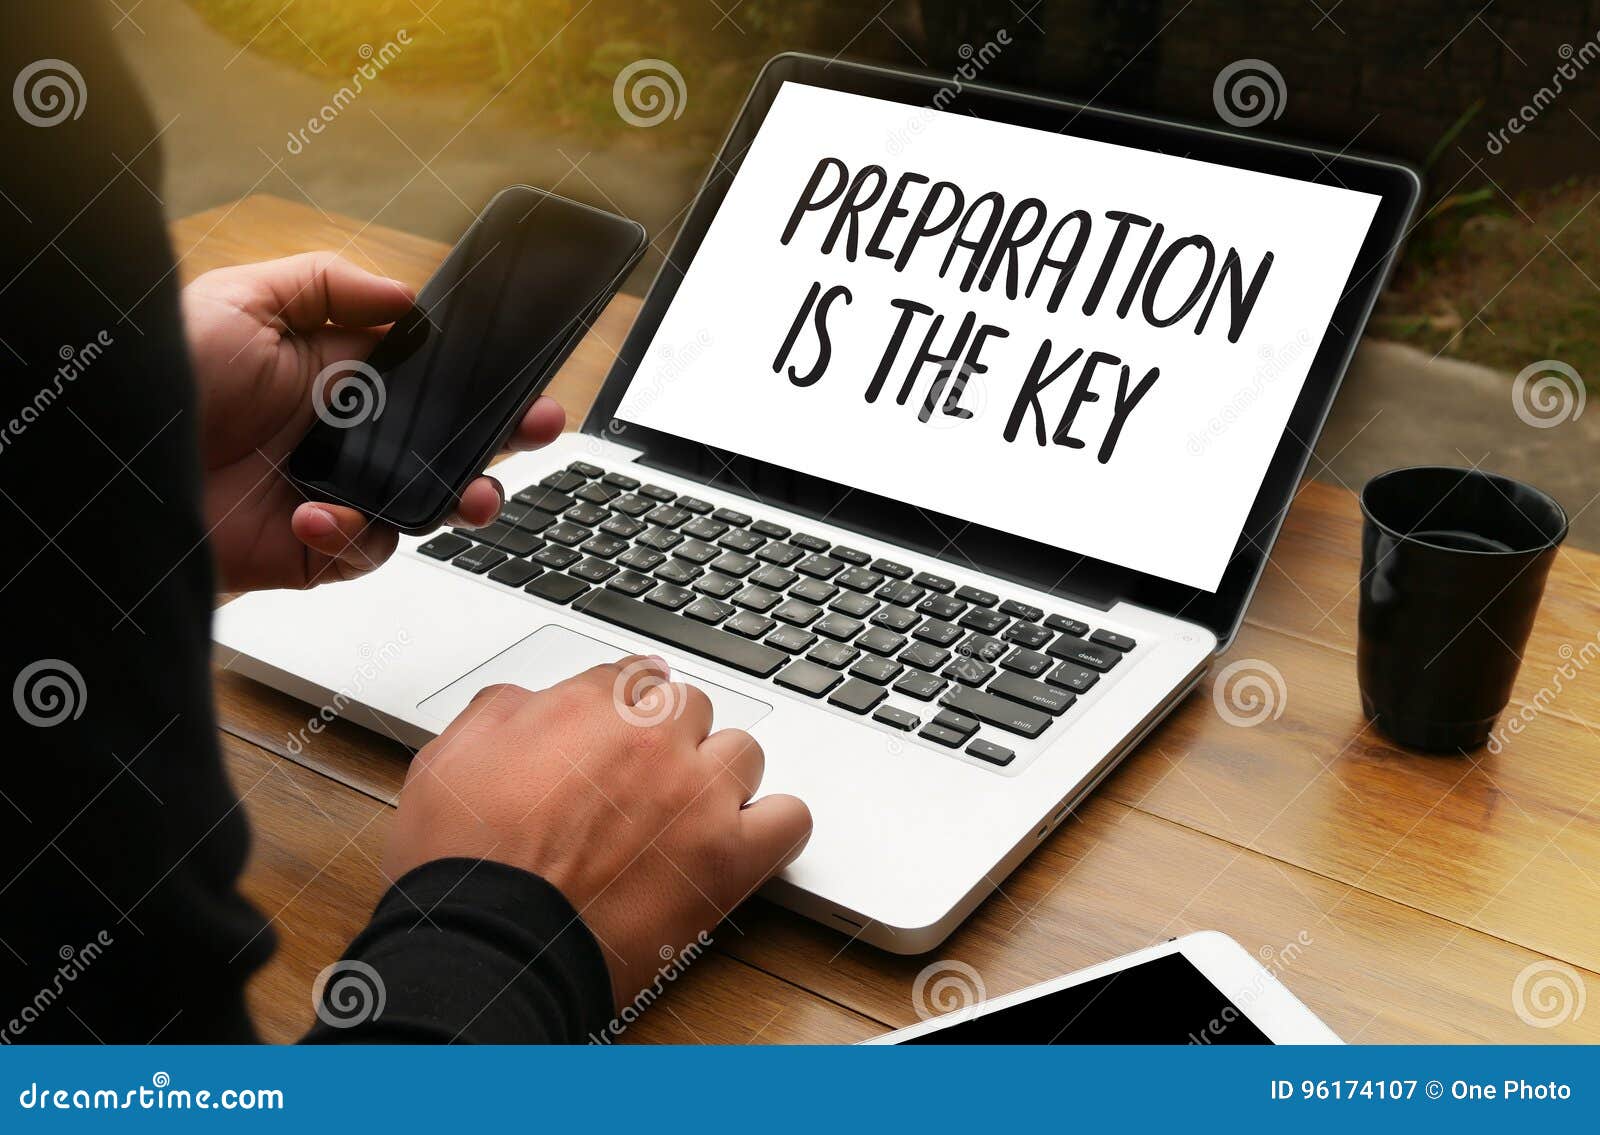 preparation is the key plan be prepared concept just prepare to